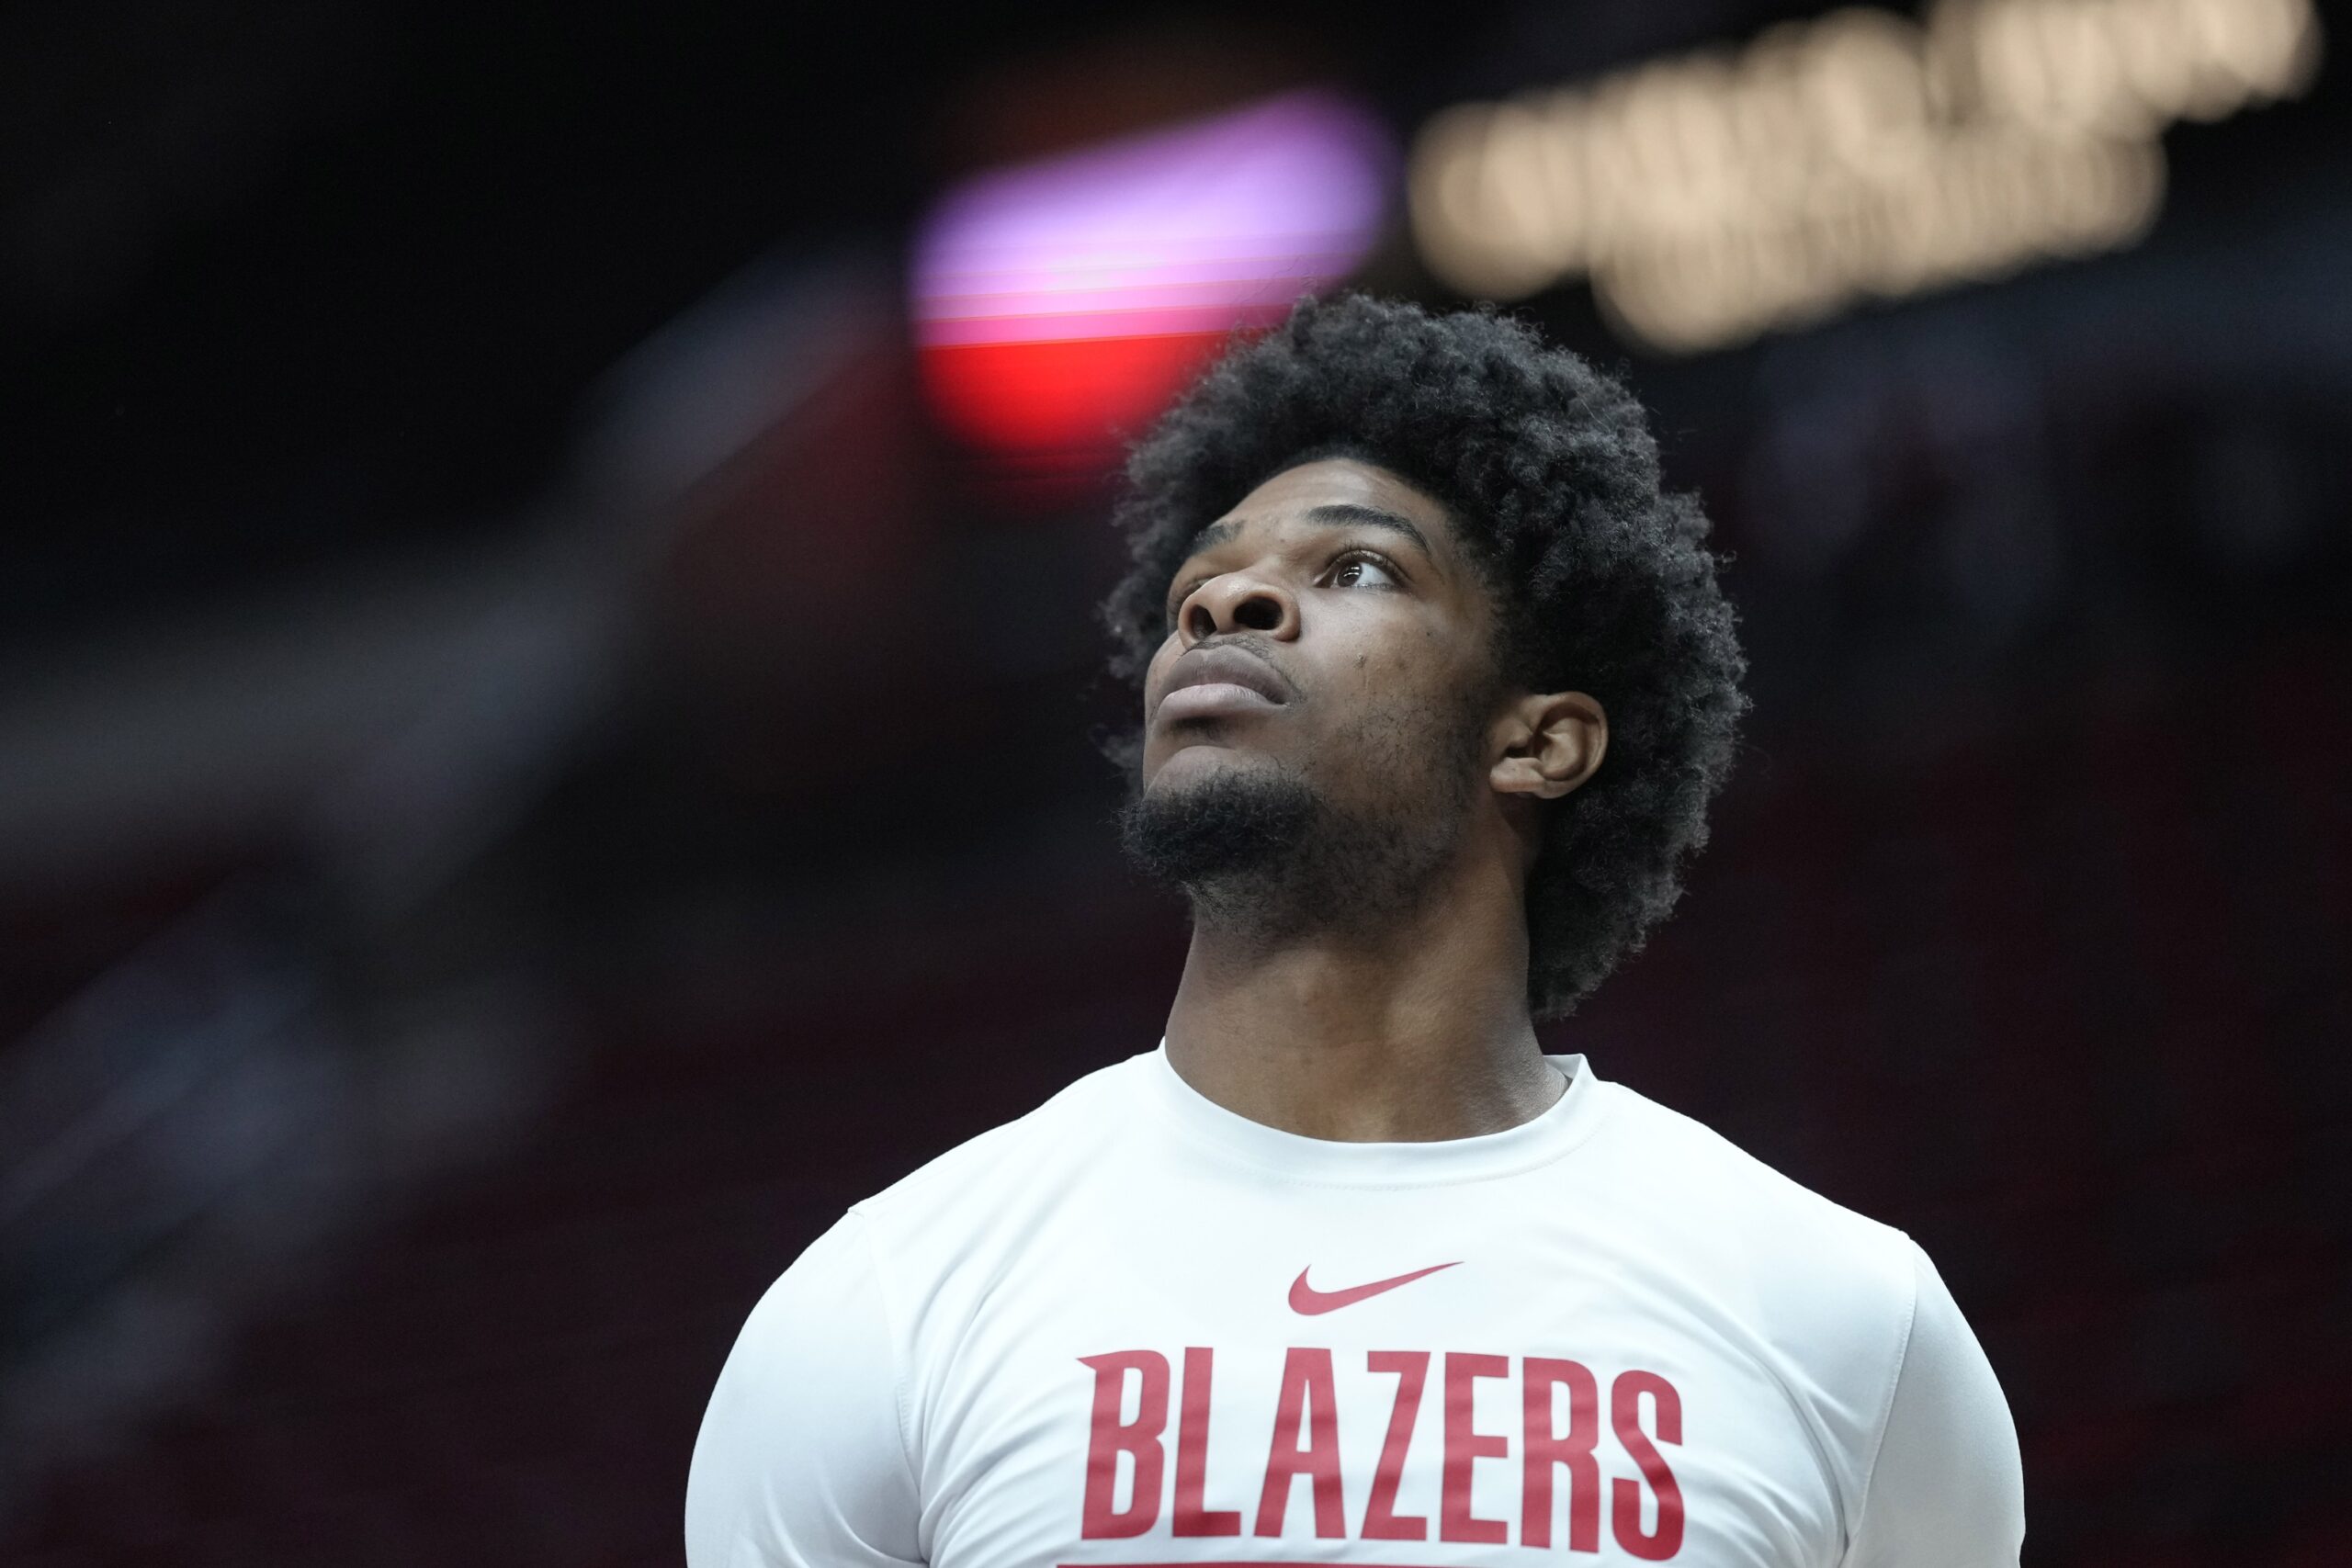 Portland Trail Blazers guard Scoot Henderson (00) warms up prior to a game against the Toronto Raptors at Moda Center.